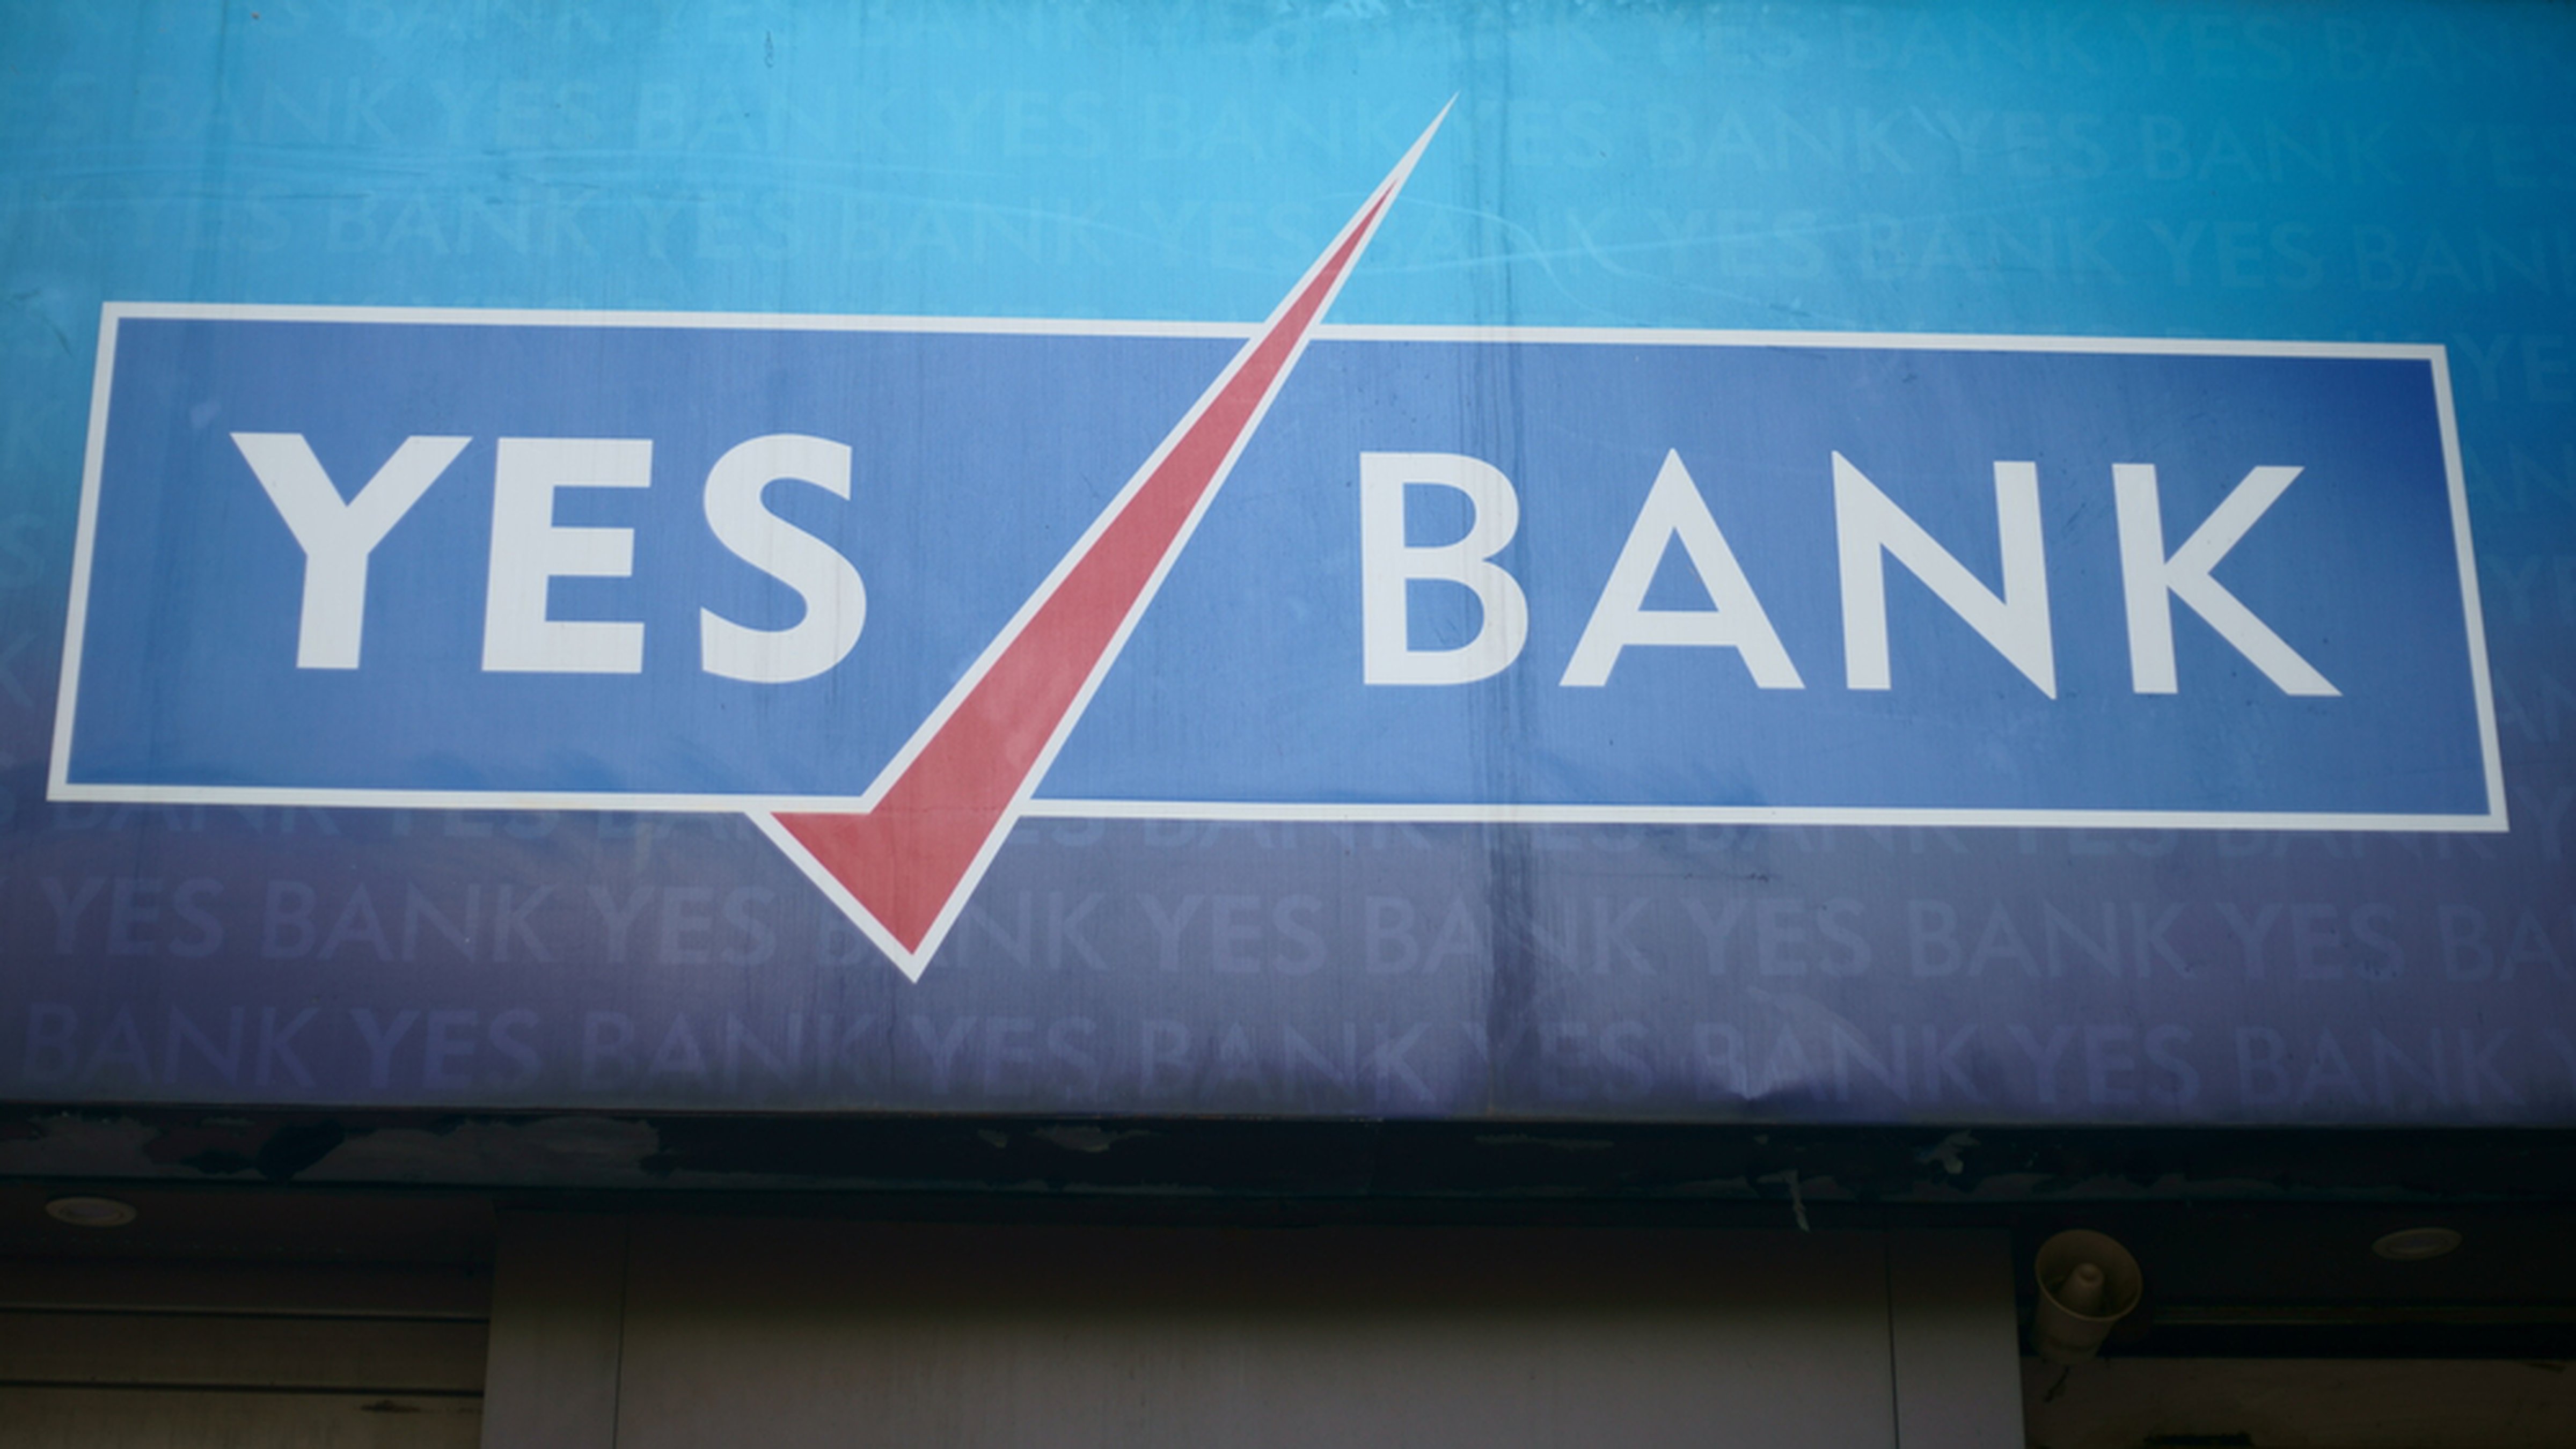 The Yes Bank scrip ended lower by 3.07 per cent at Rs 186.40 on the Bombay Stock Exchange 